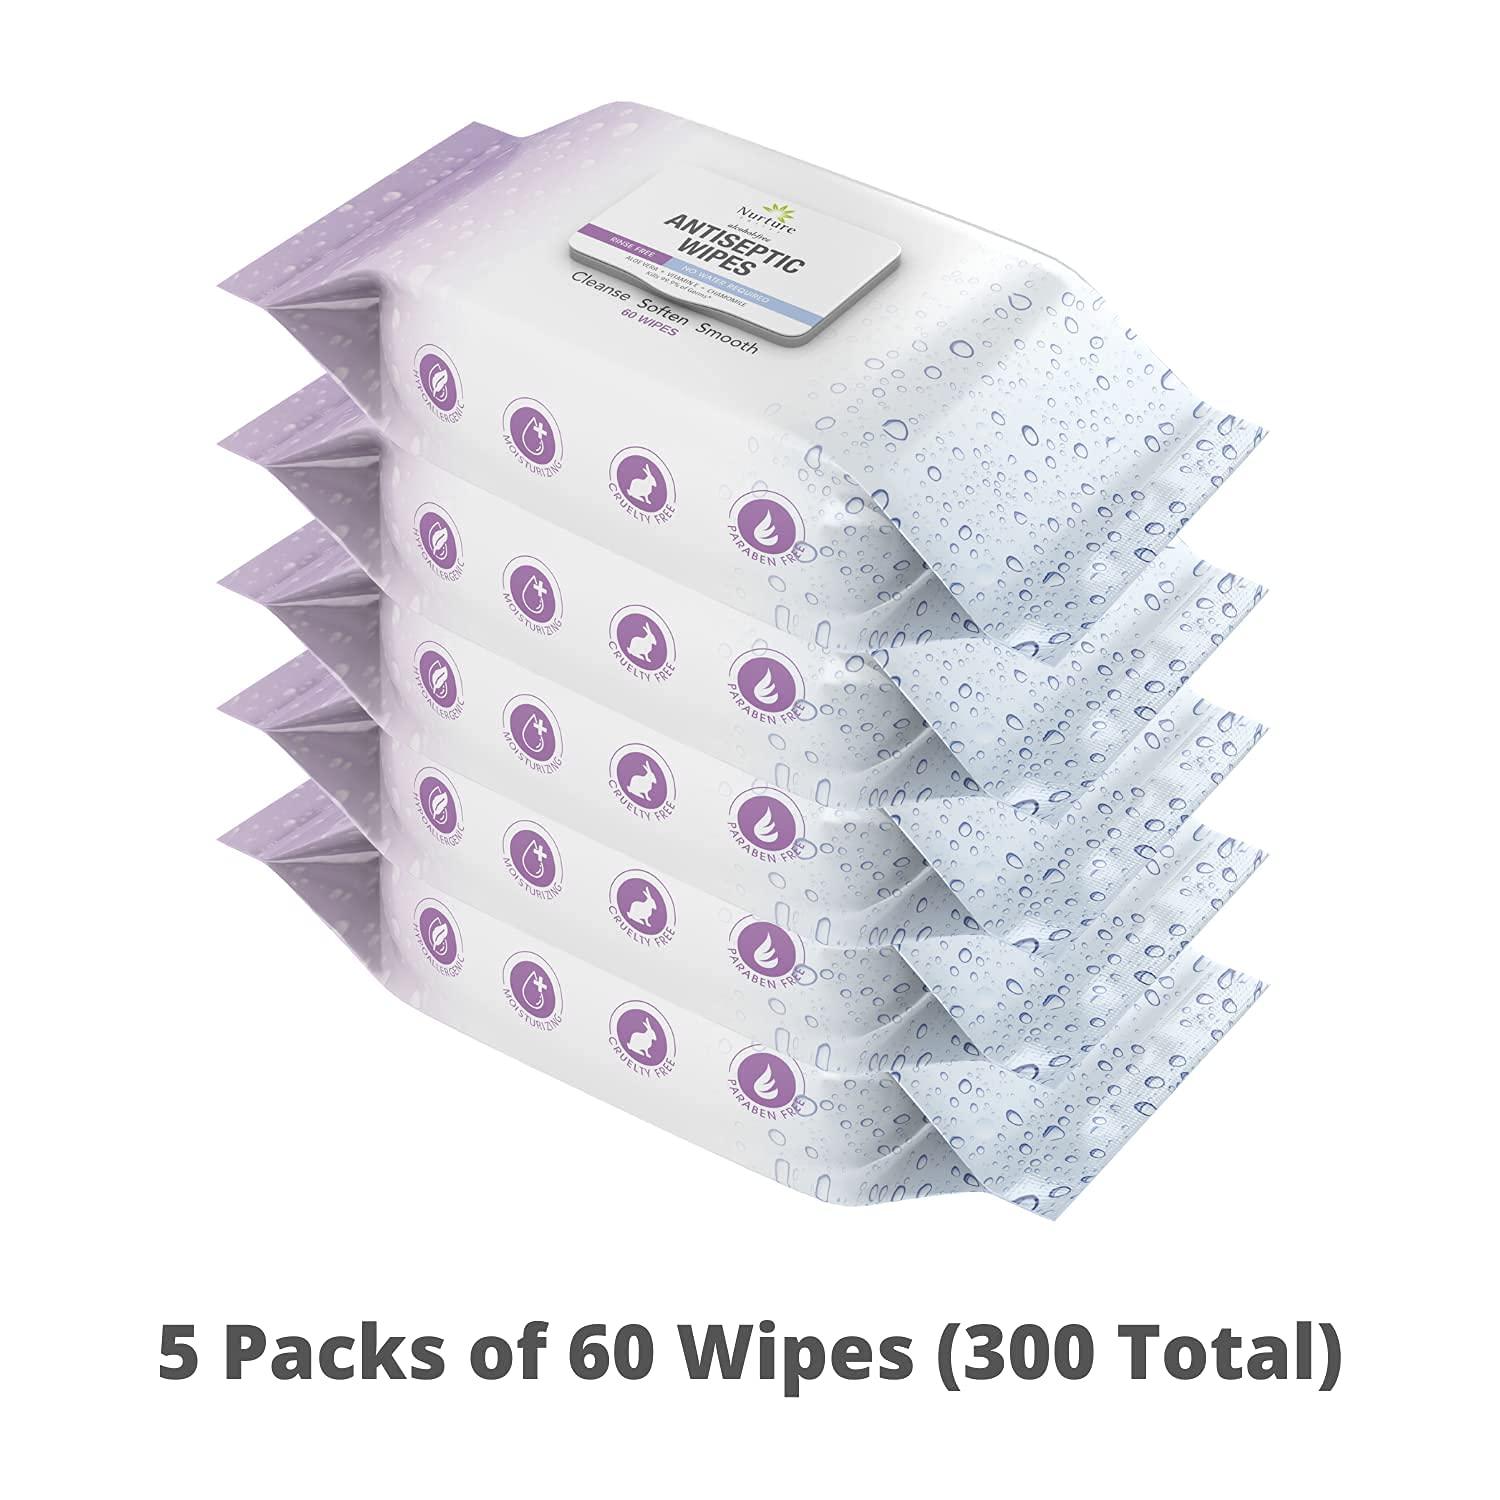 Gorilla Wipes Antibacterial Cleaning Wipes - Pack of 300